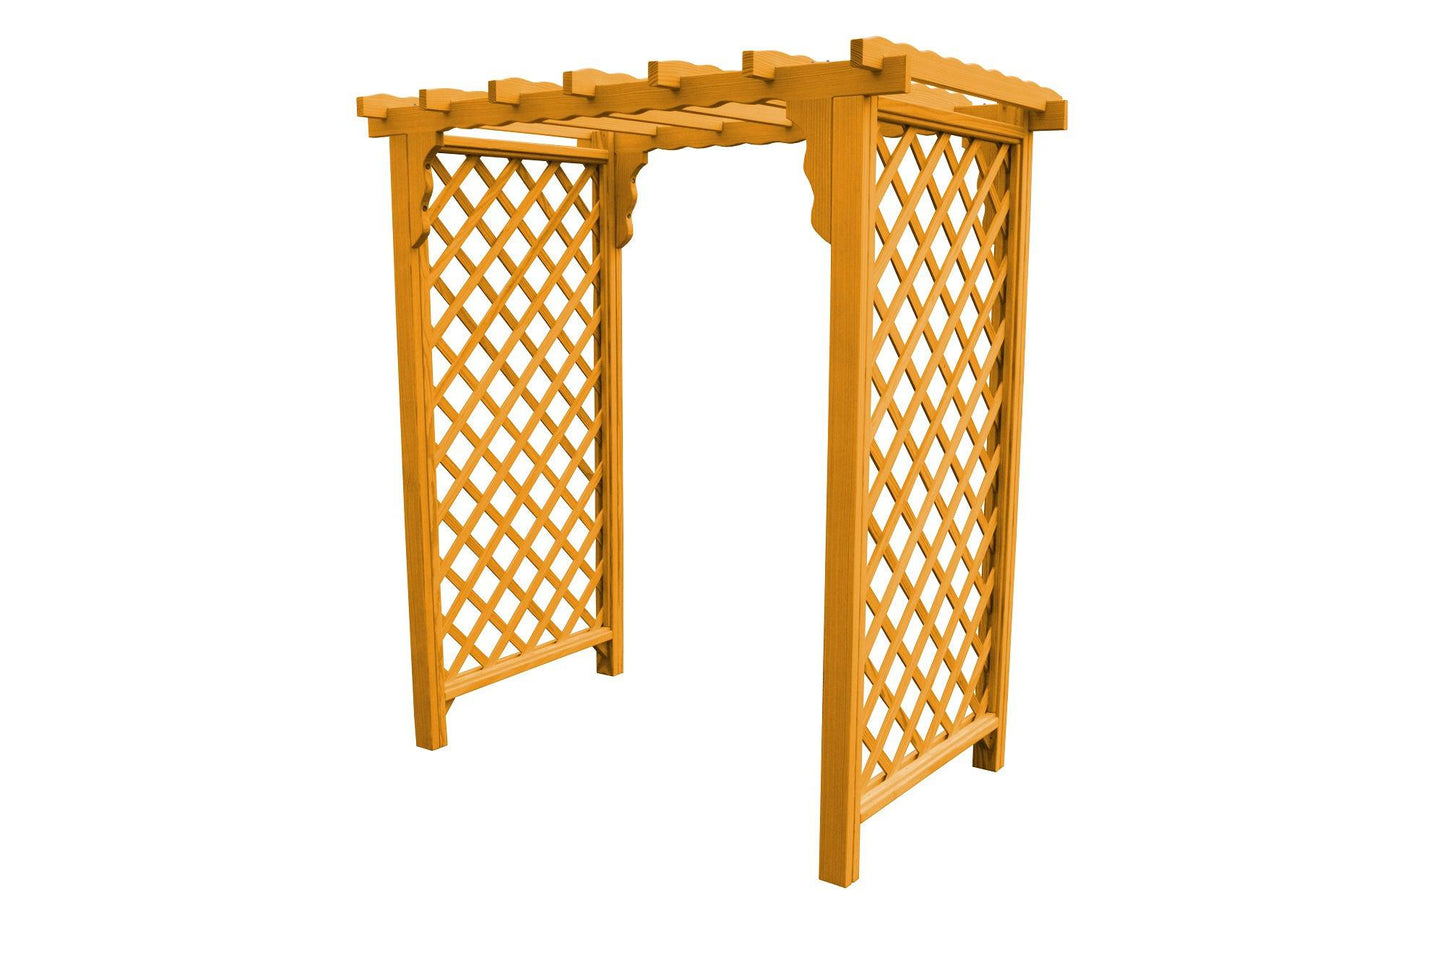 A&L FURNITURE CO. 5' Covington Pressure Treated Pine Arbor - LEAD TIME TO SHIP 10 BUSINESS DAYS